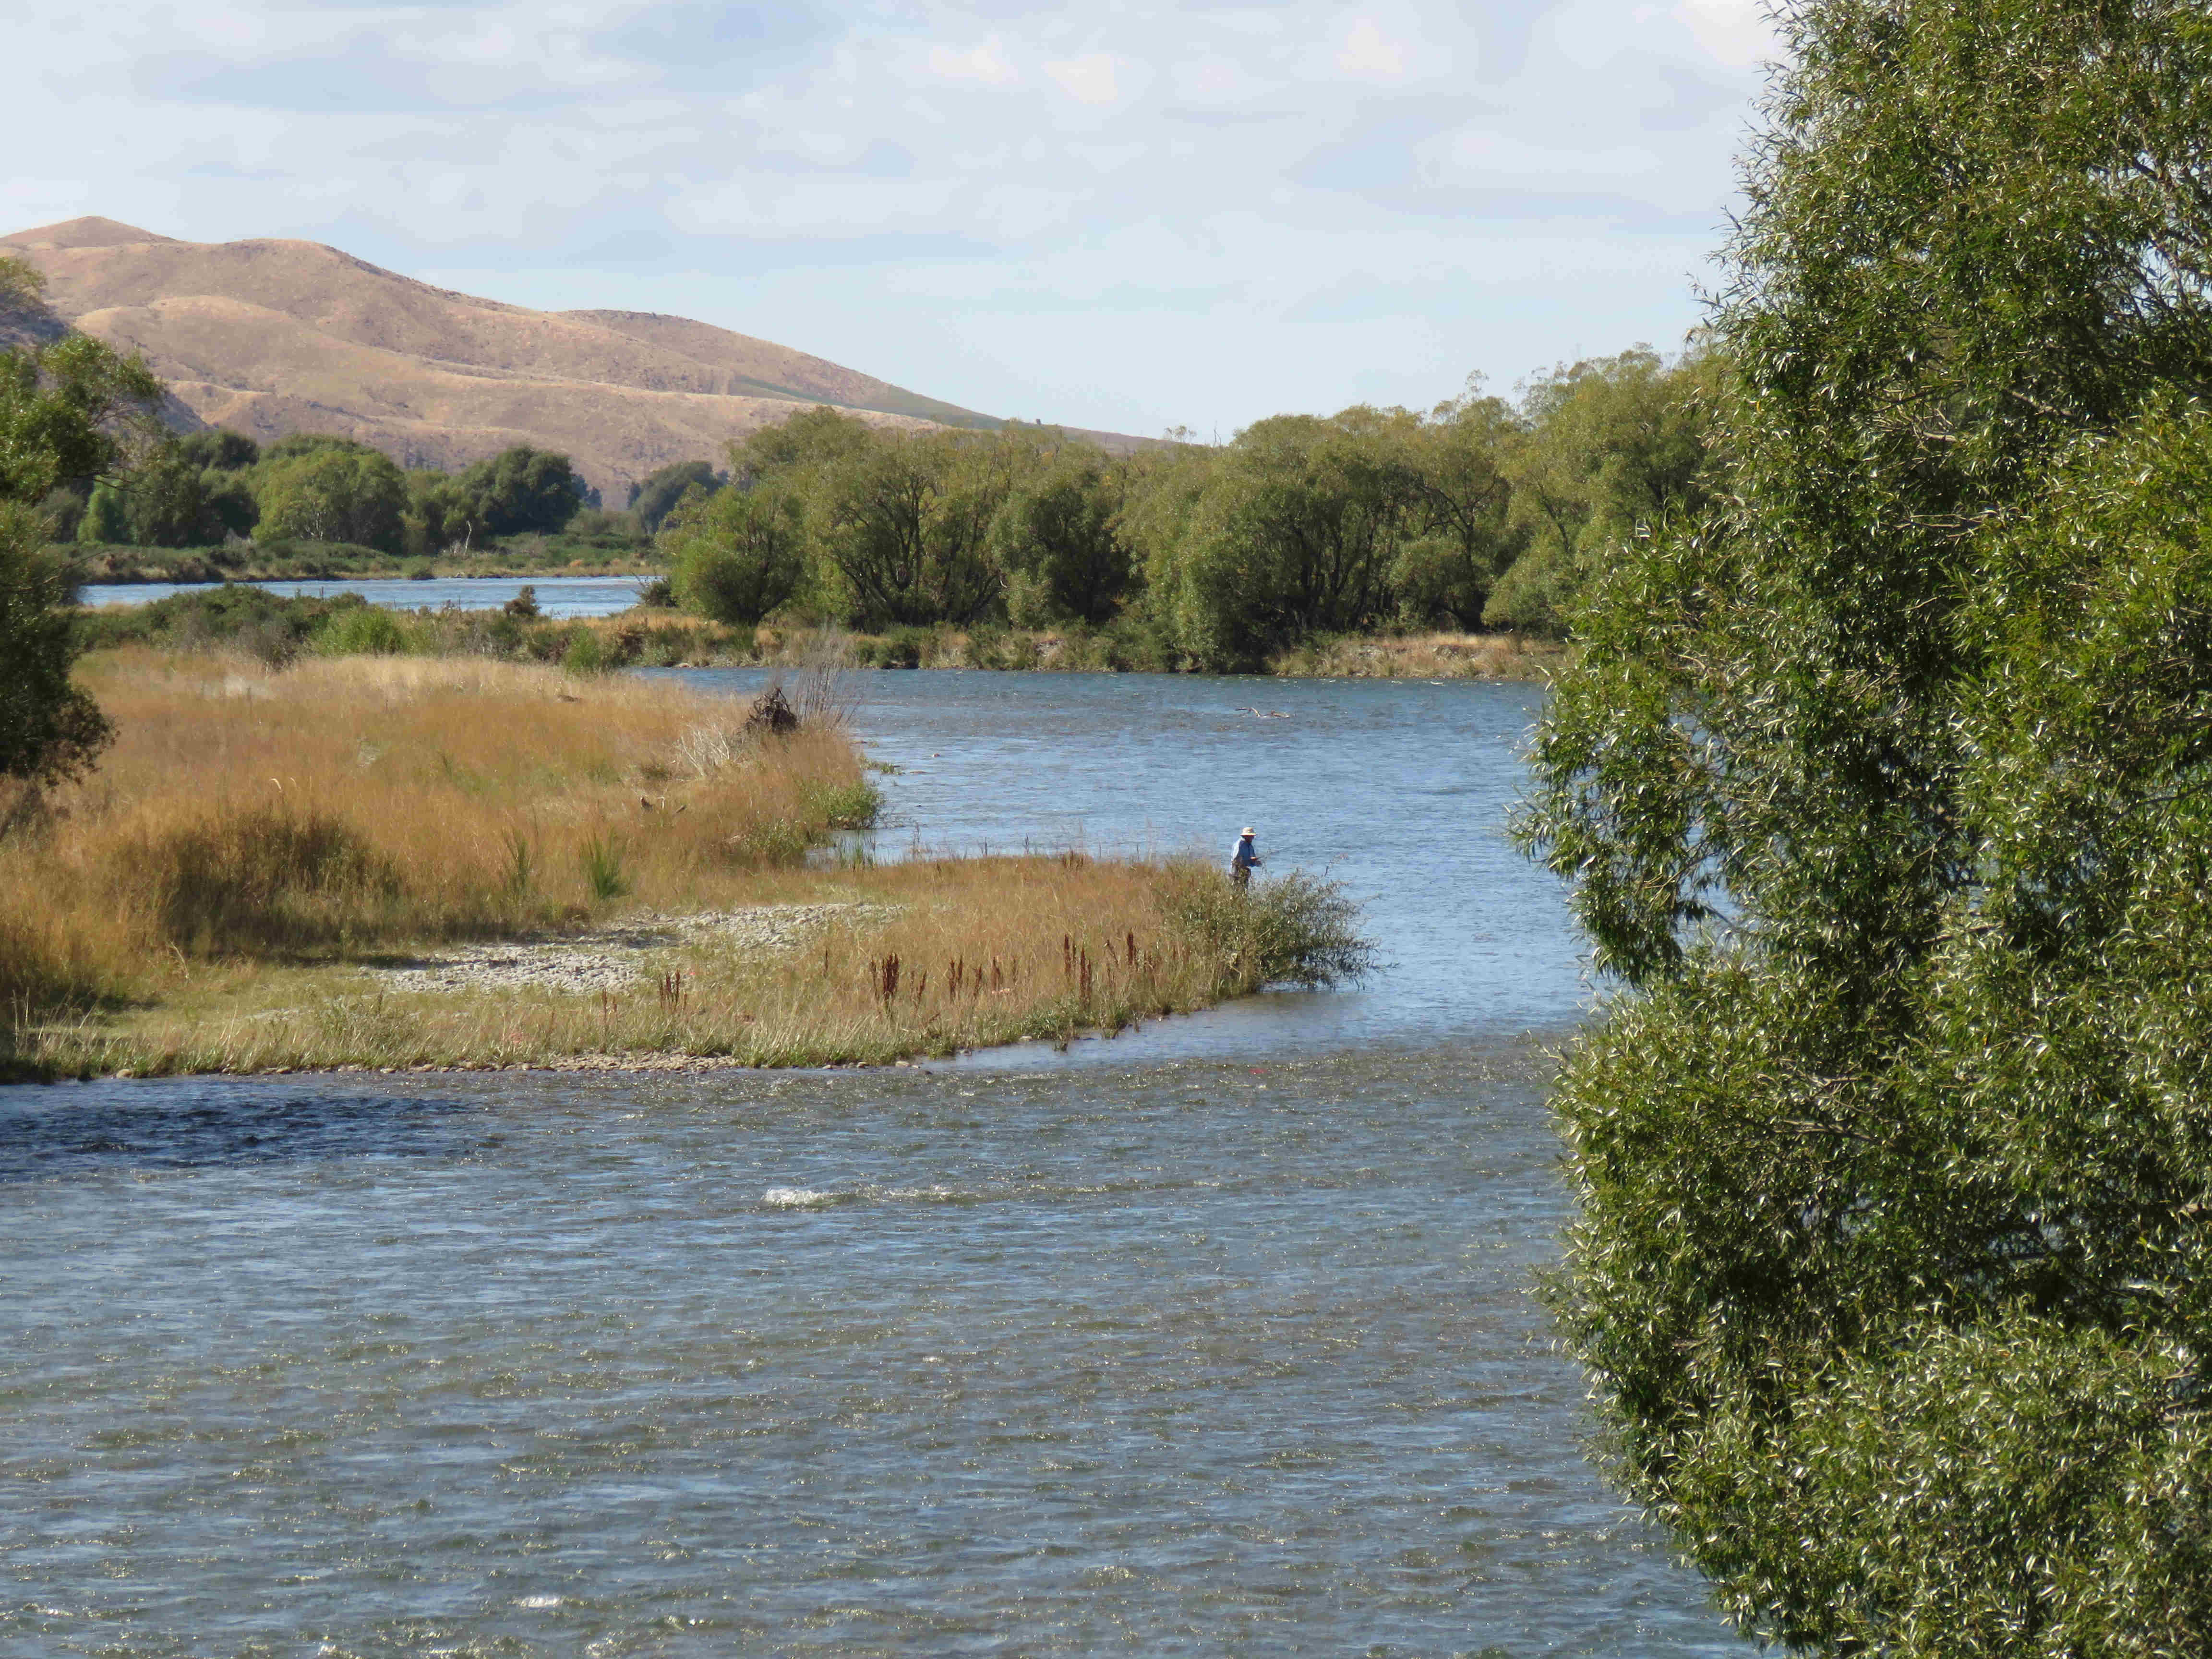 WFR2122.05 The Waitaki River offers excellent trout fishing in October especiall